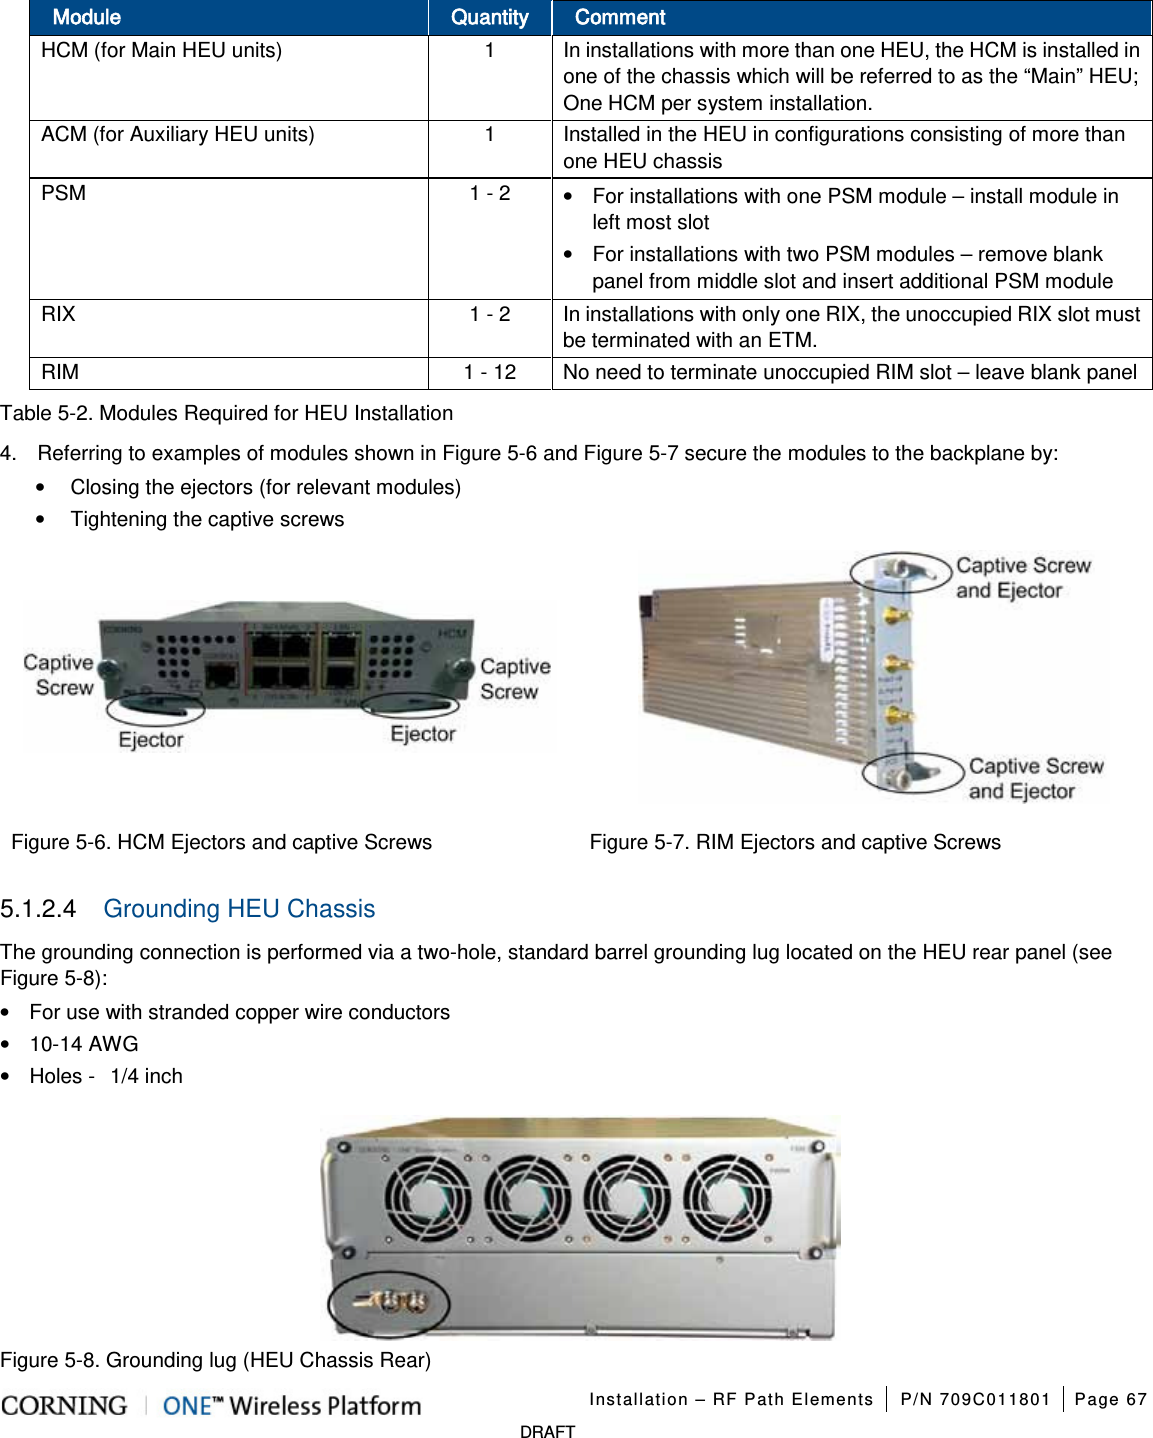   Installation – RF Path Elements P/N 709C011801 Page 67   DRAFT Module Quantity Comment HCM (for Main HEU units)  1  In installations with more than one HEU, the HCM is installed in one of the chassis which will be referred to as the “Main” HEU; One HCM per system installation.   ACM (for Auxiliary HEU units)  1  Installed in the HEU in configurations consisting of more than one HEU chassis PSM 1 - 2  • For installations with one PSM module – install module in left most slot • For installations with two PSM modules – remove blank panel from middle slot and insert additional PSM module RIX 1 - 2  In installations with only one RIX, the unoccupied RIX slot must be terminated with an ETM. RIM 1 - 12 No need to terminate unoccupied RIM slot – leave blank panel Table  5-2. Modules Required for HEU Installation 4.  Referring to examples of modules shown in Figure  5-6 and Figure  5-7 secure the modules to the backplane by: • Closing the ejectors (for relevant modules) • Tightening the captive screws   Figure  5-6. HCM Ejectors and captive Screws Figure  5-7. RIM Ejectors and captive Screws 5.1.2.4  Grounding HEU Chassis The grounding connection is performed via a two-hole, standard barrel grounding lug located on the HEU rear panel (see Figure  5-8): • For use with stranded copper wire conductors • 10-14 AWG • Holes -   1/4 inch  Figure  5-8. Grounding lug (HEU Chassis Rear) 